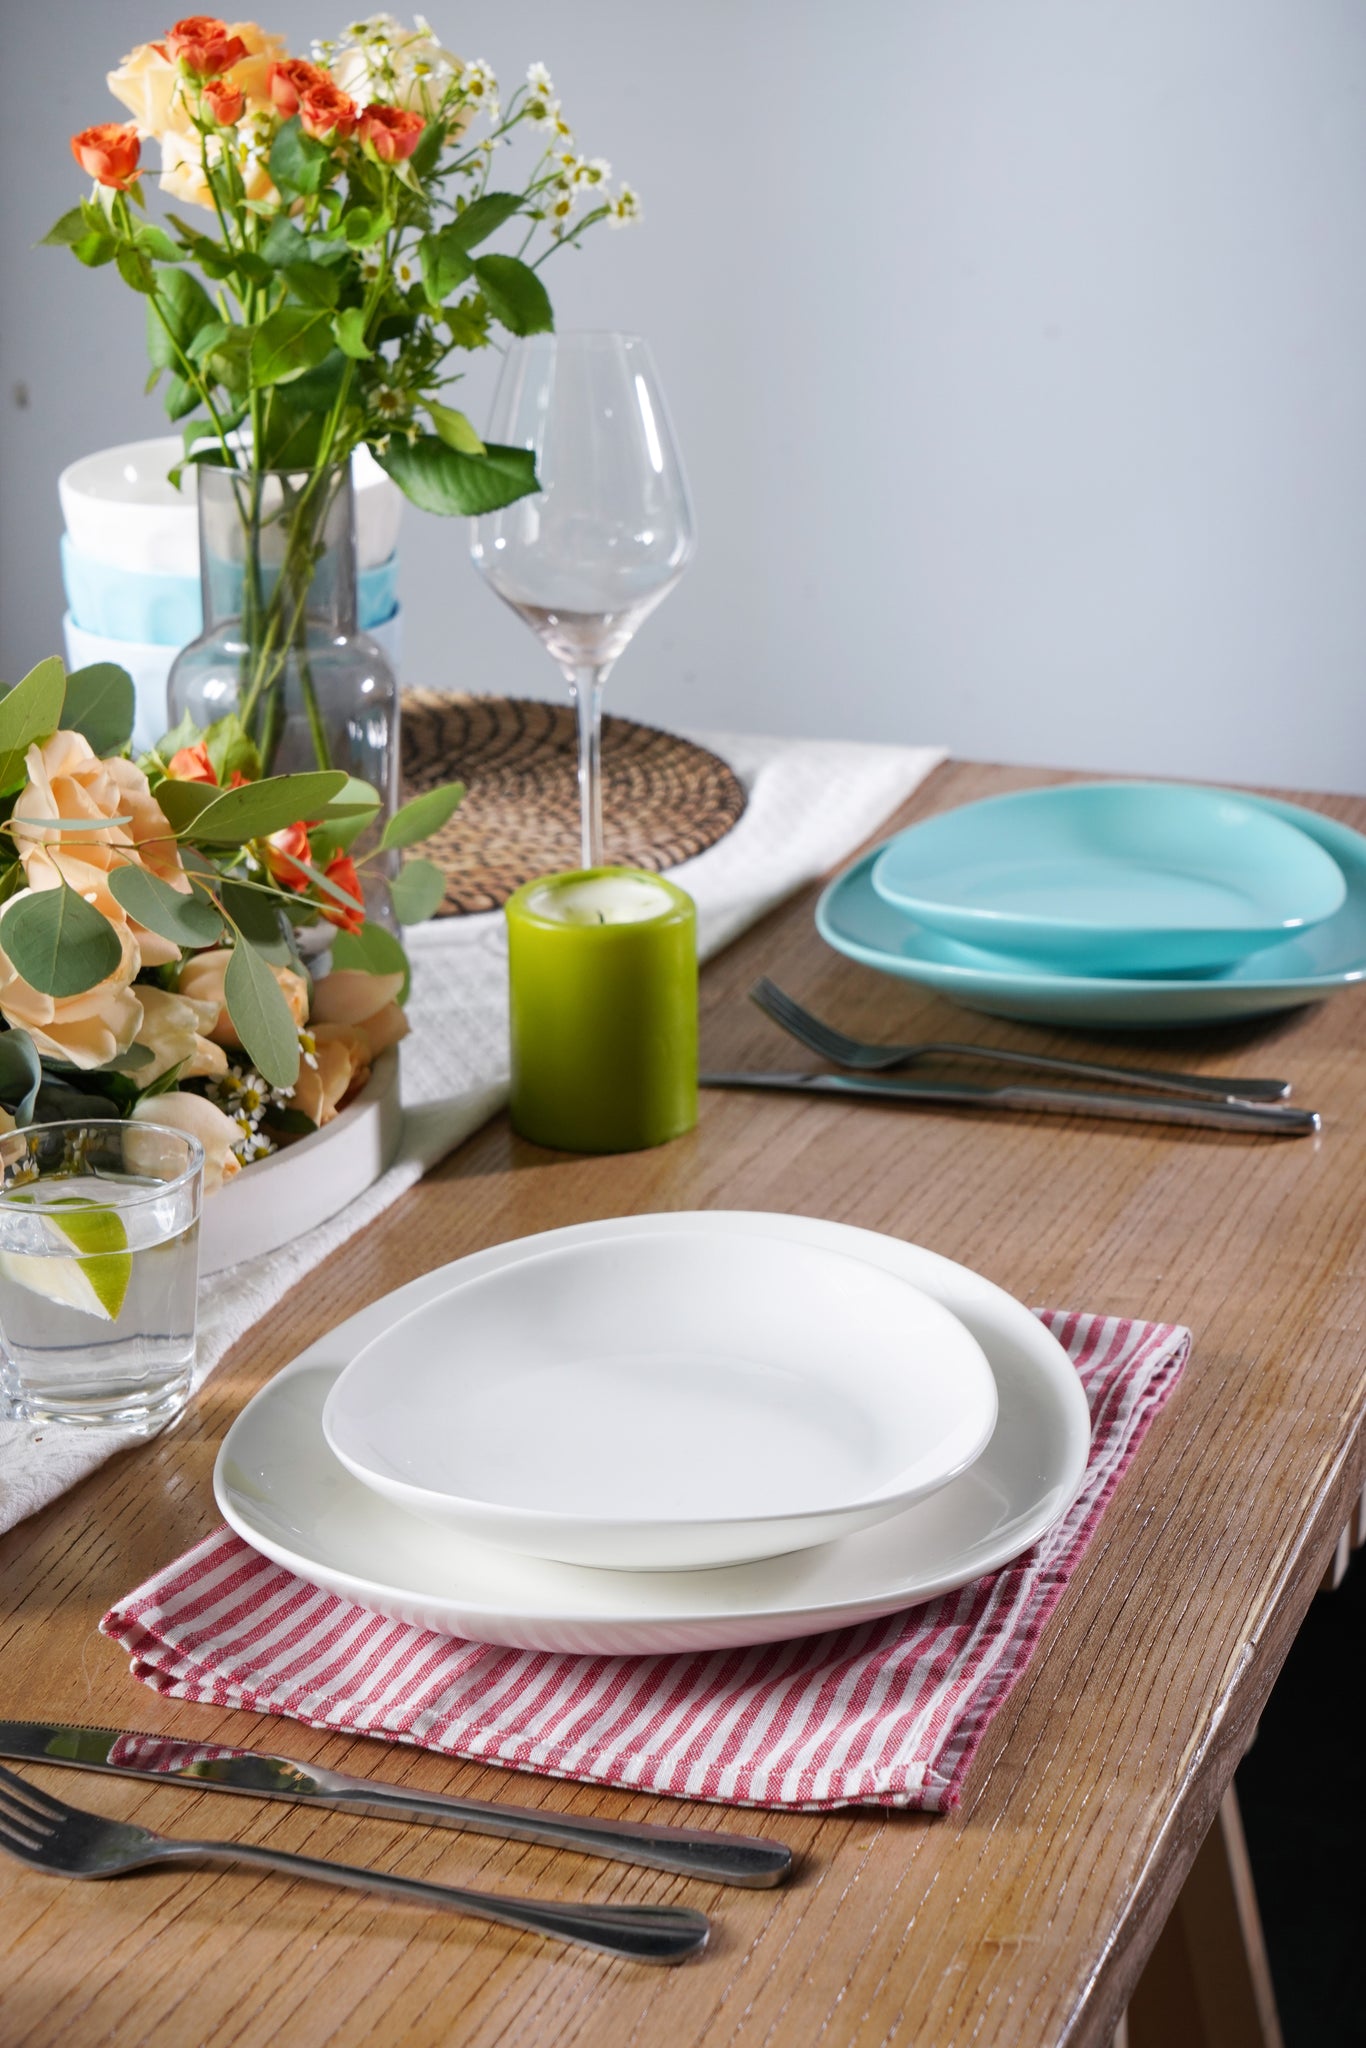 What Role Does Dinnerware Play in Home Décor?